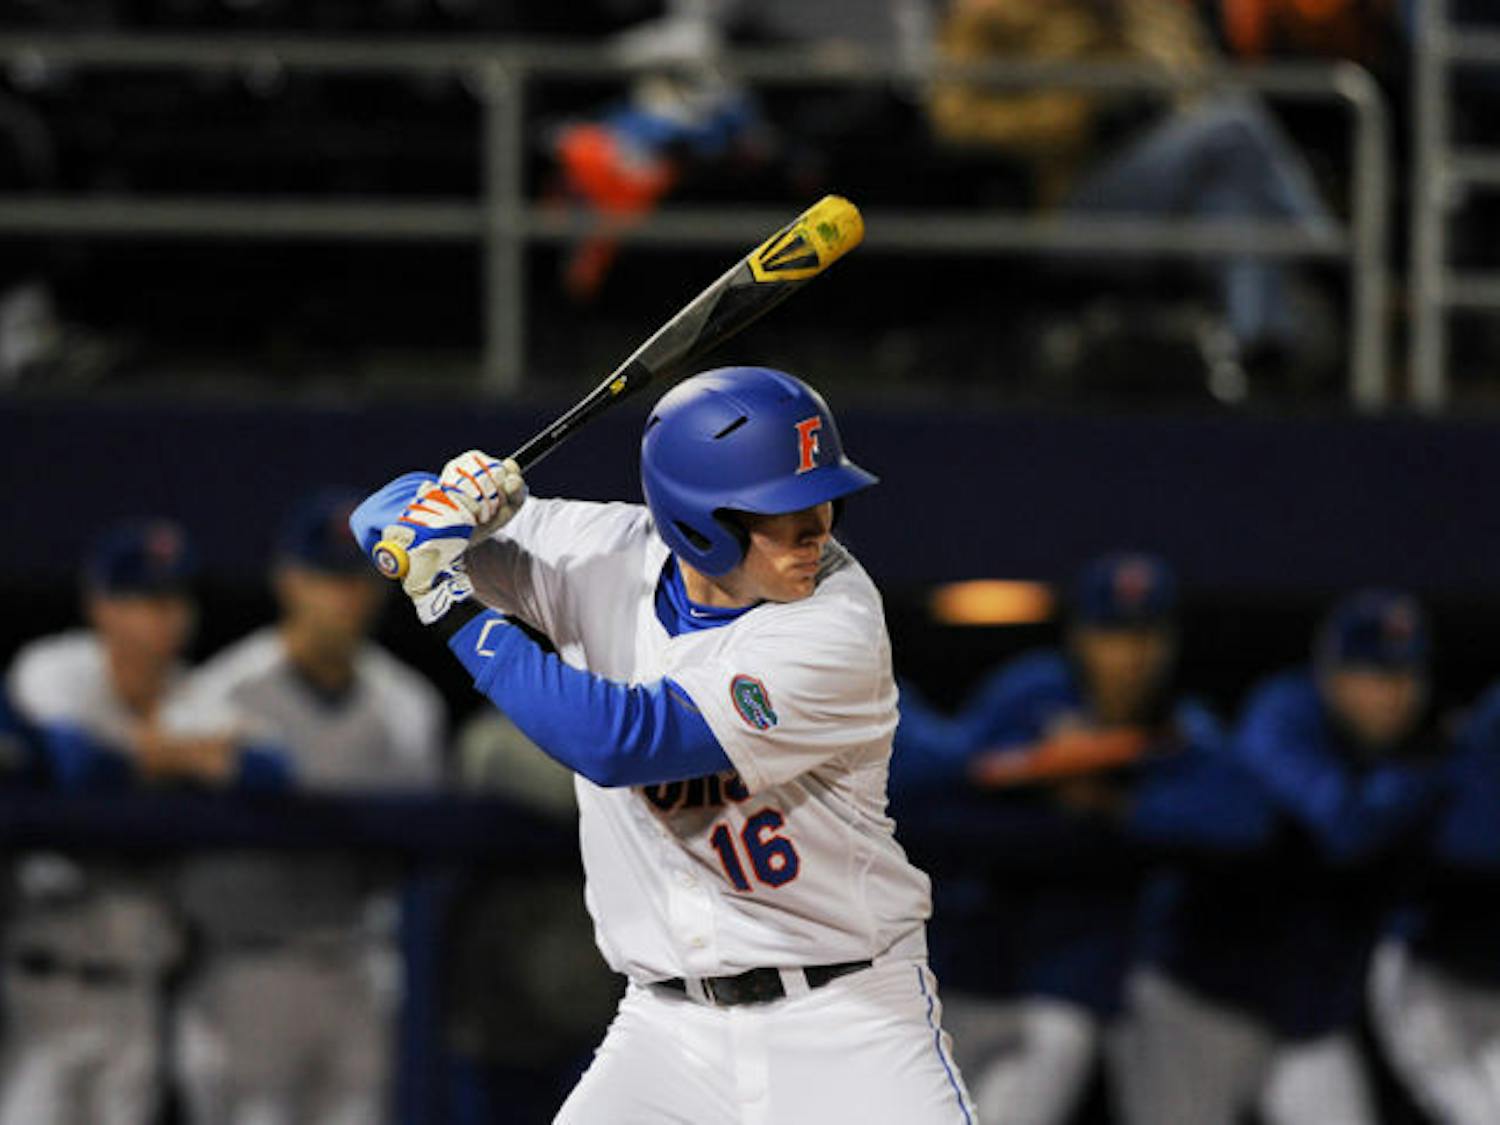 Justin Shafer bats during Florida’s 4-0 win against Maryland on Feb. 14 at McKethan Stadium.